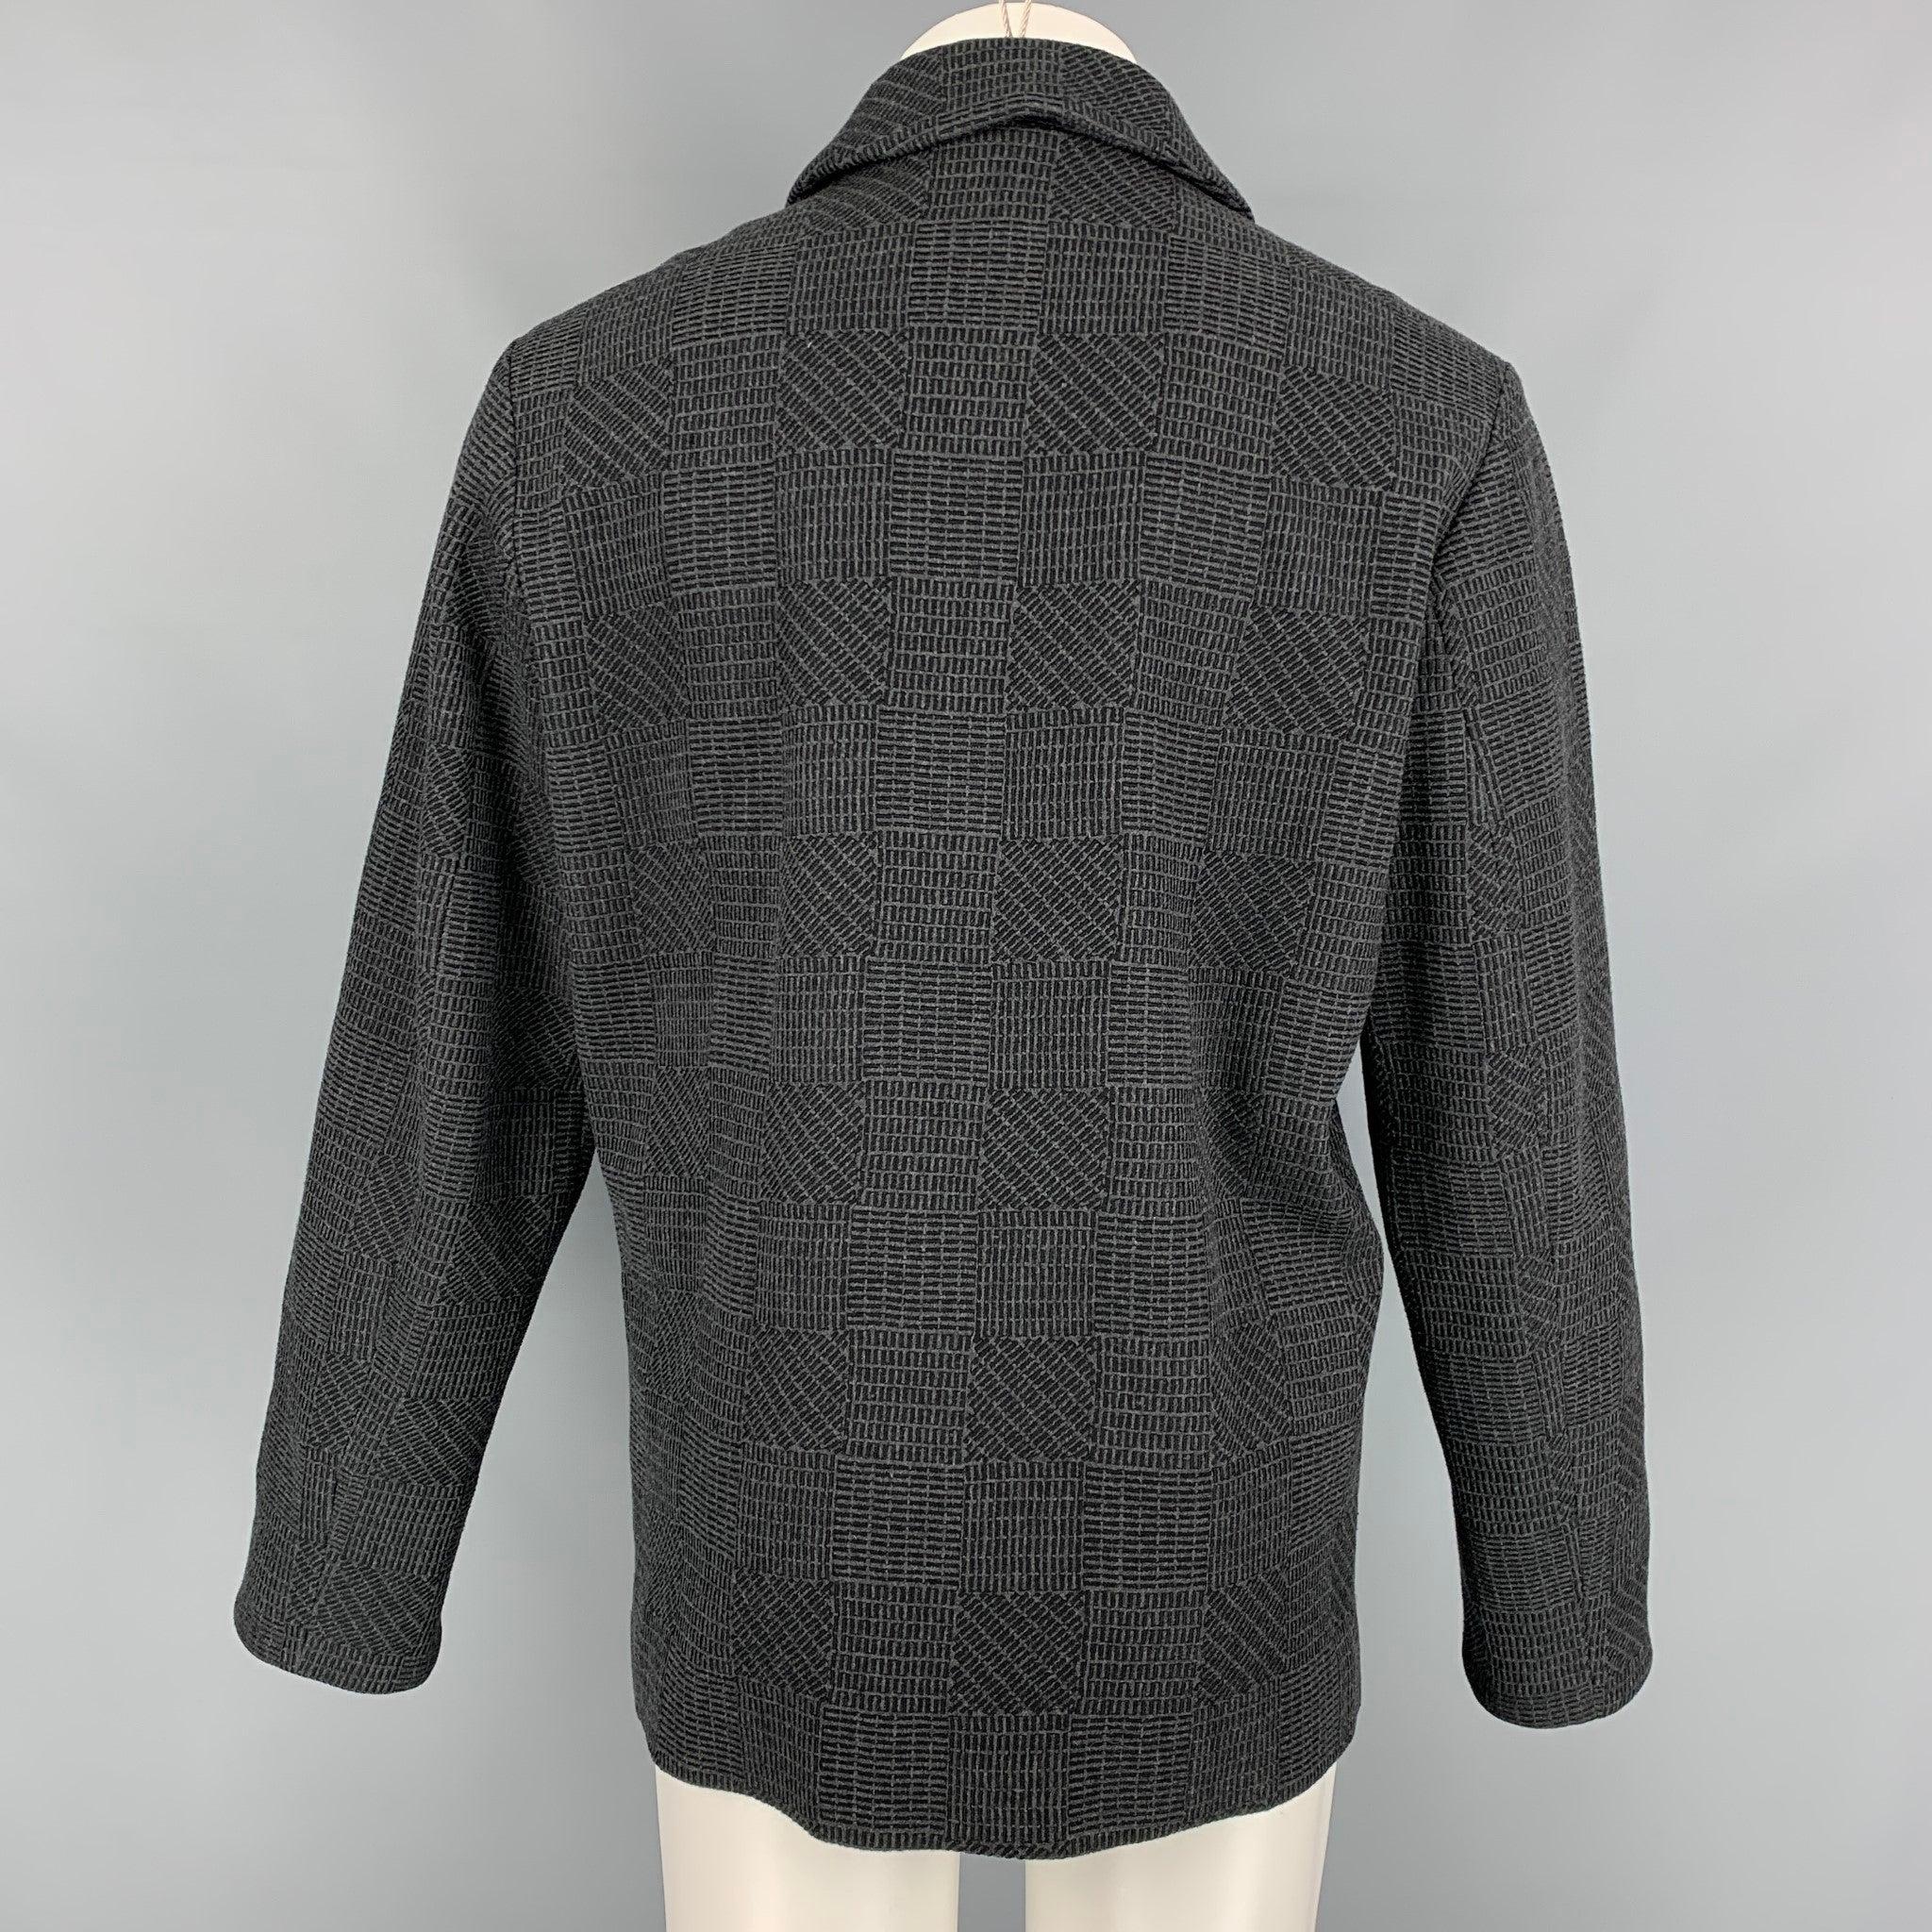 CALVIN KLEIN COLLECTION Size 38 Charcoal Black Textured Wool / Cashmere Jacket For Sale 1